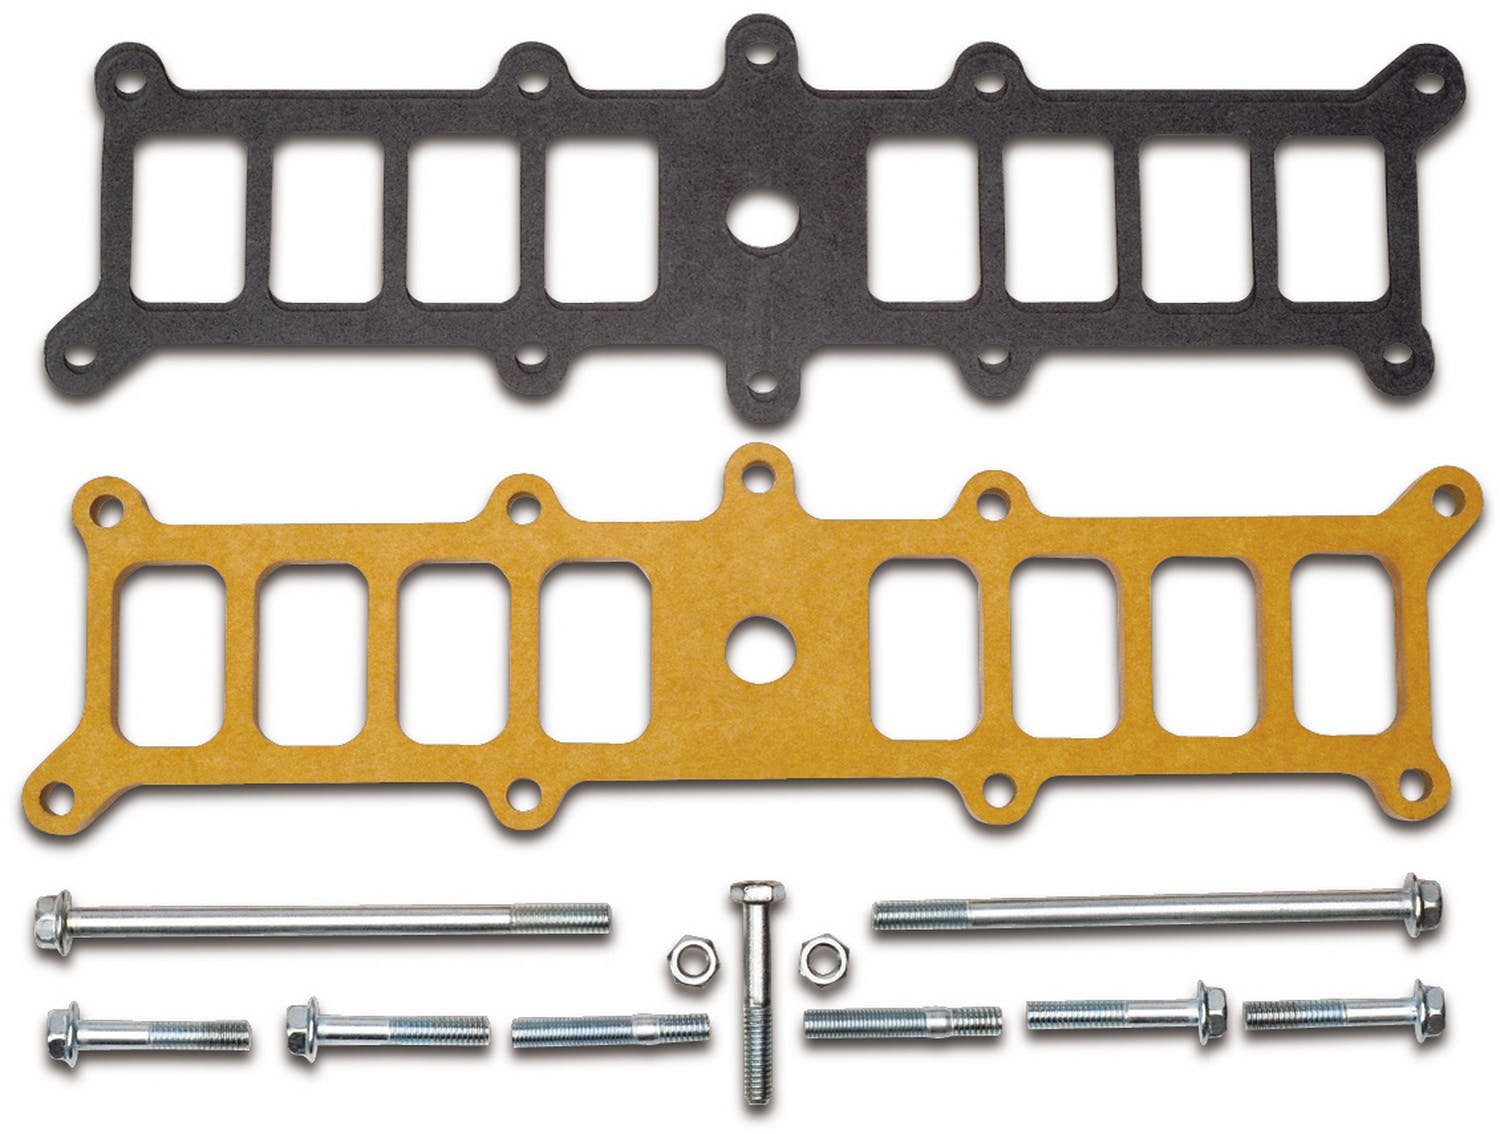 Edelbrock 8727 1/2 Base to Upper Spacer Plate Kit for Perf. and Perf. RPM 5.0 Manifolds